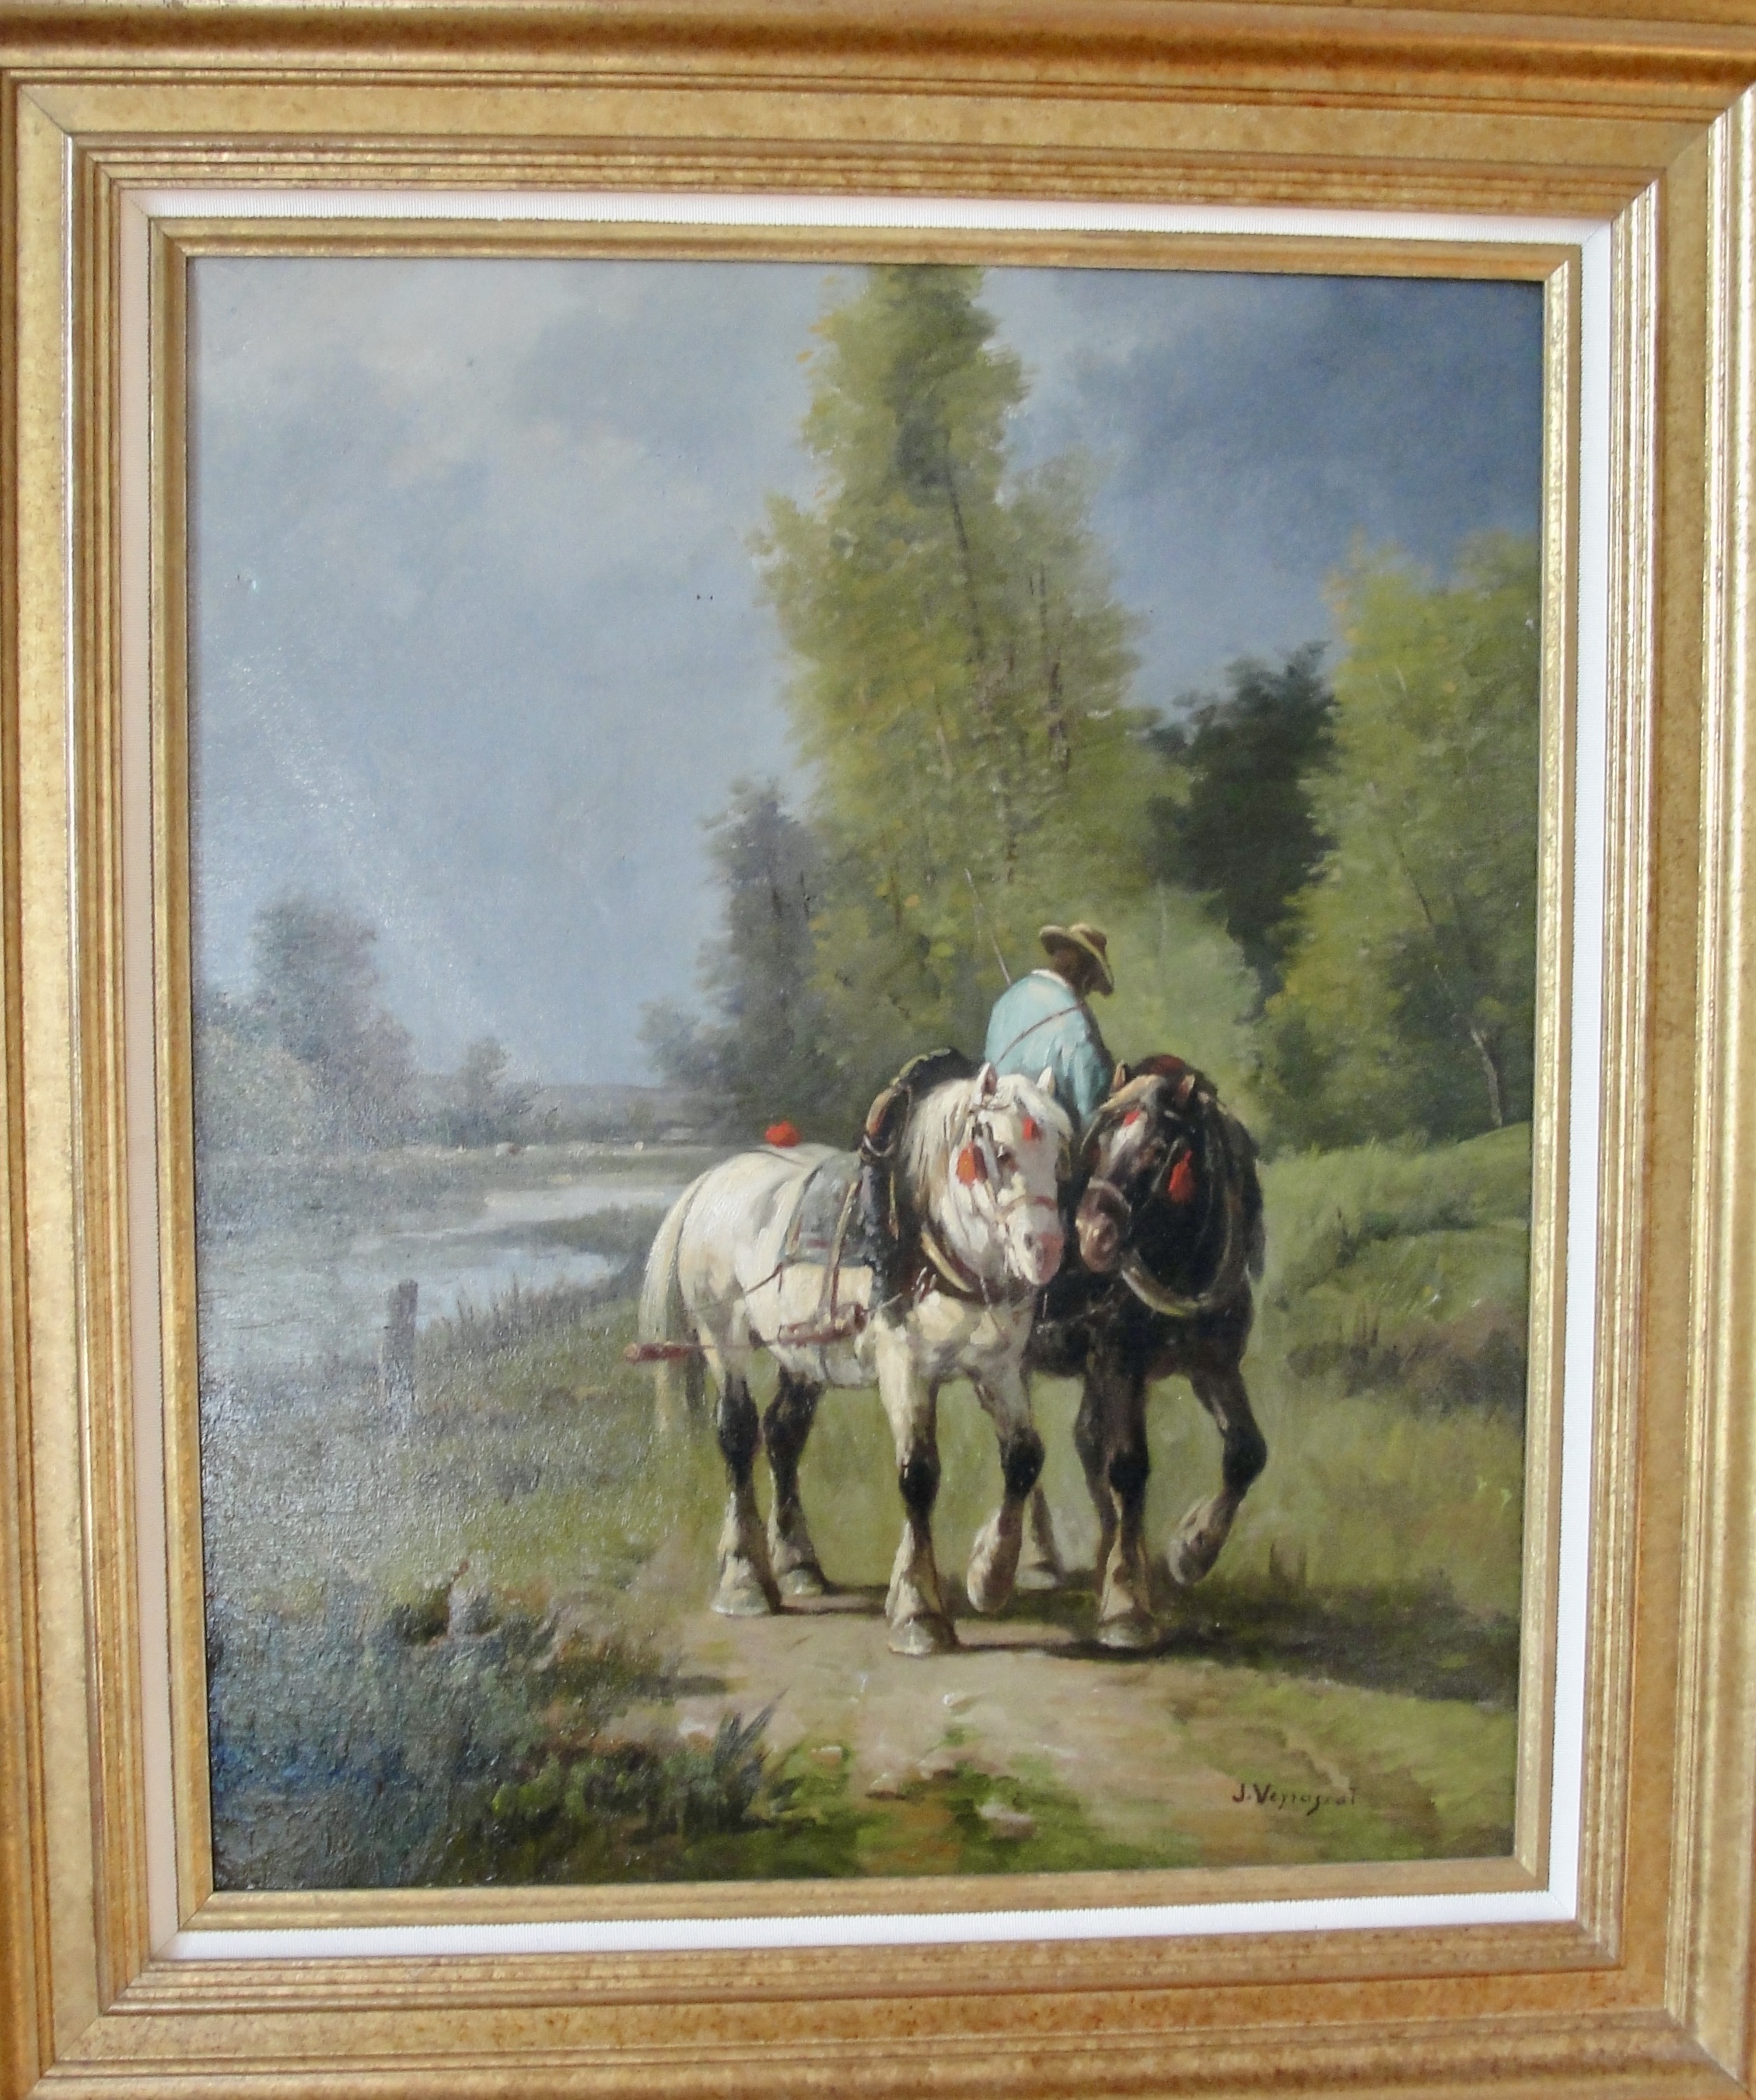 Horses next to the river